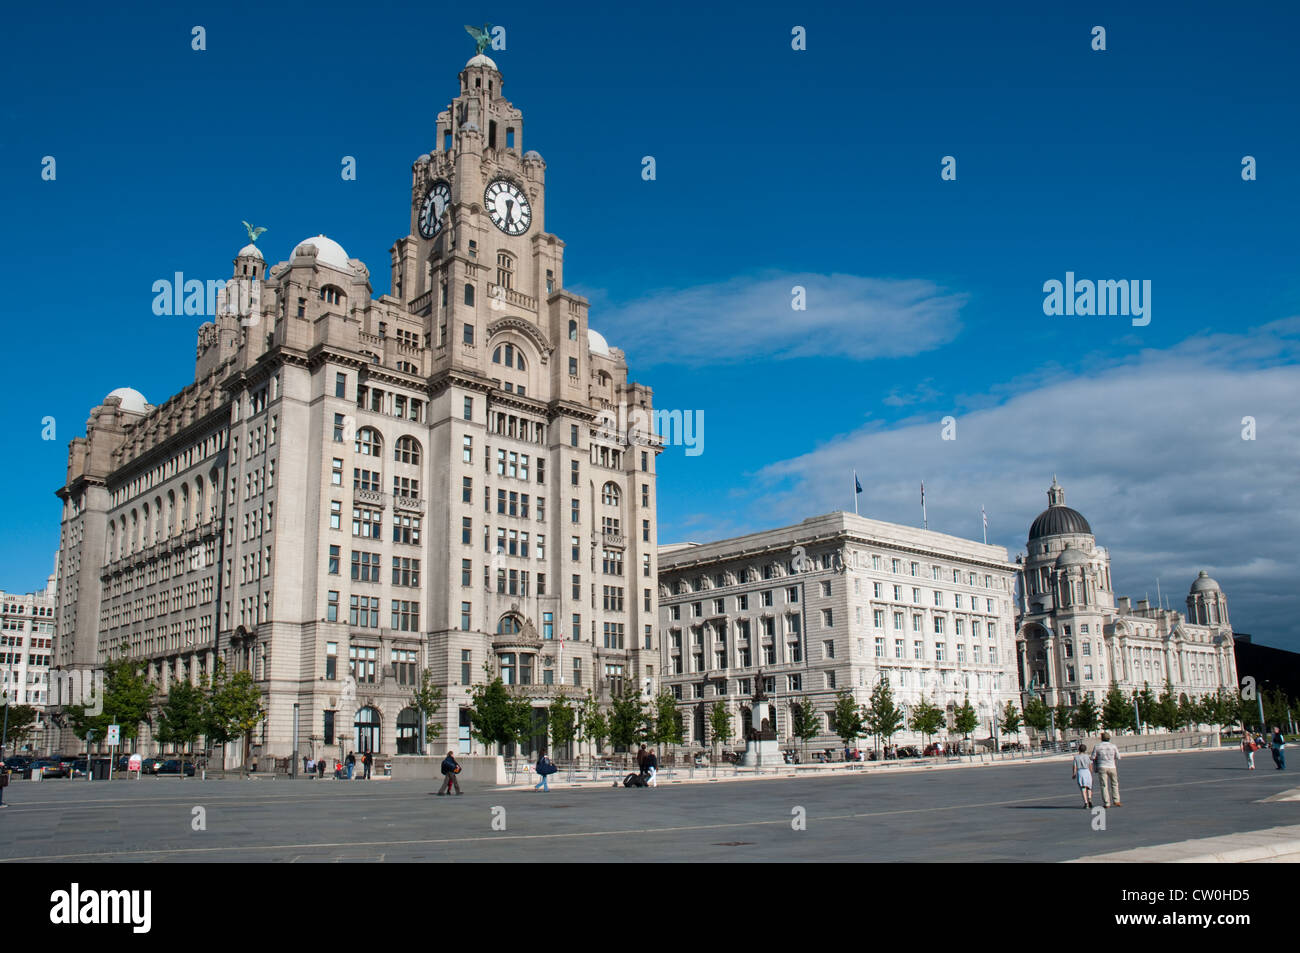 The Three Graces, Pier Head ,Liverpool. The Royal Liver Building, Cunard Building and the Port of Liverpool Building. Stock Photo